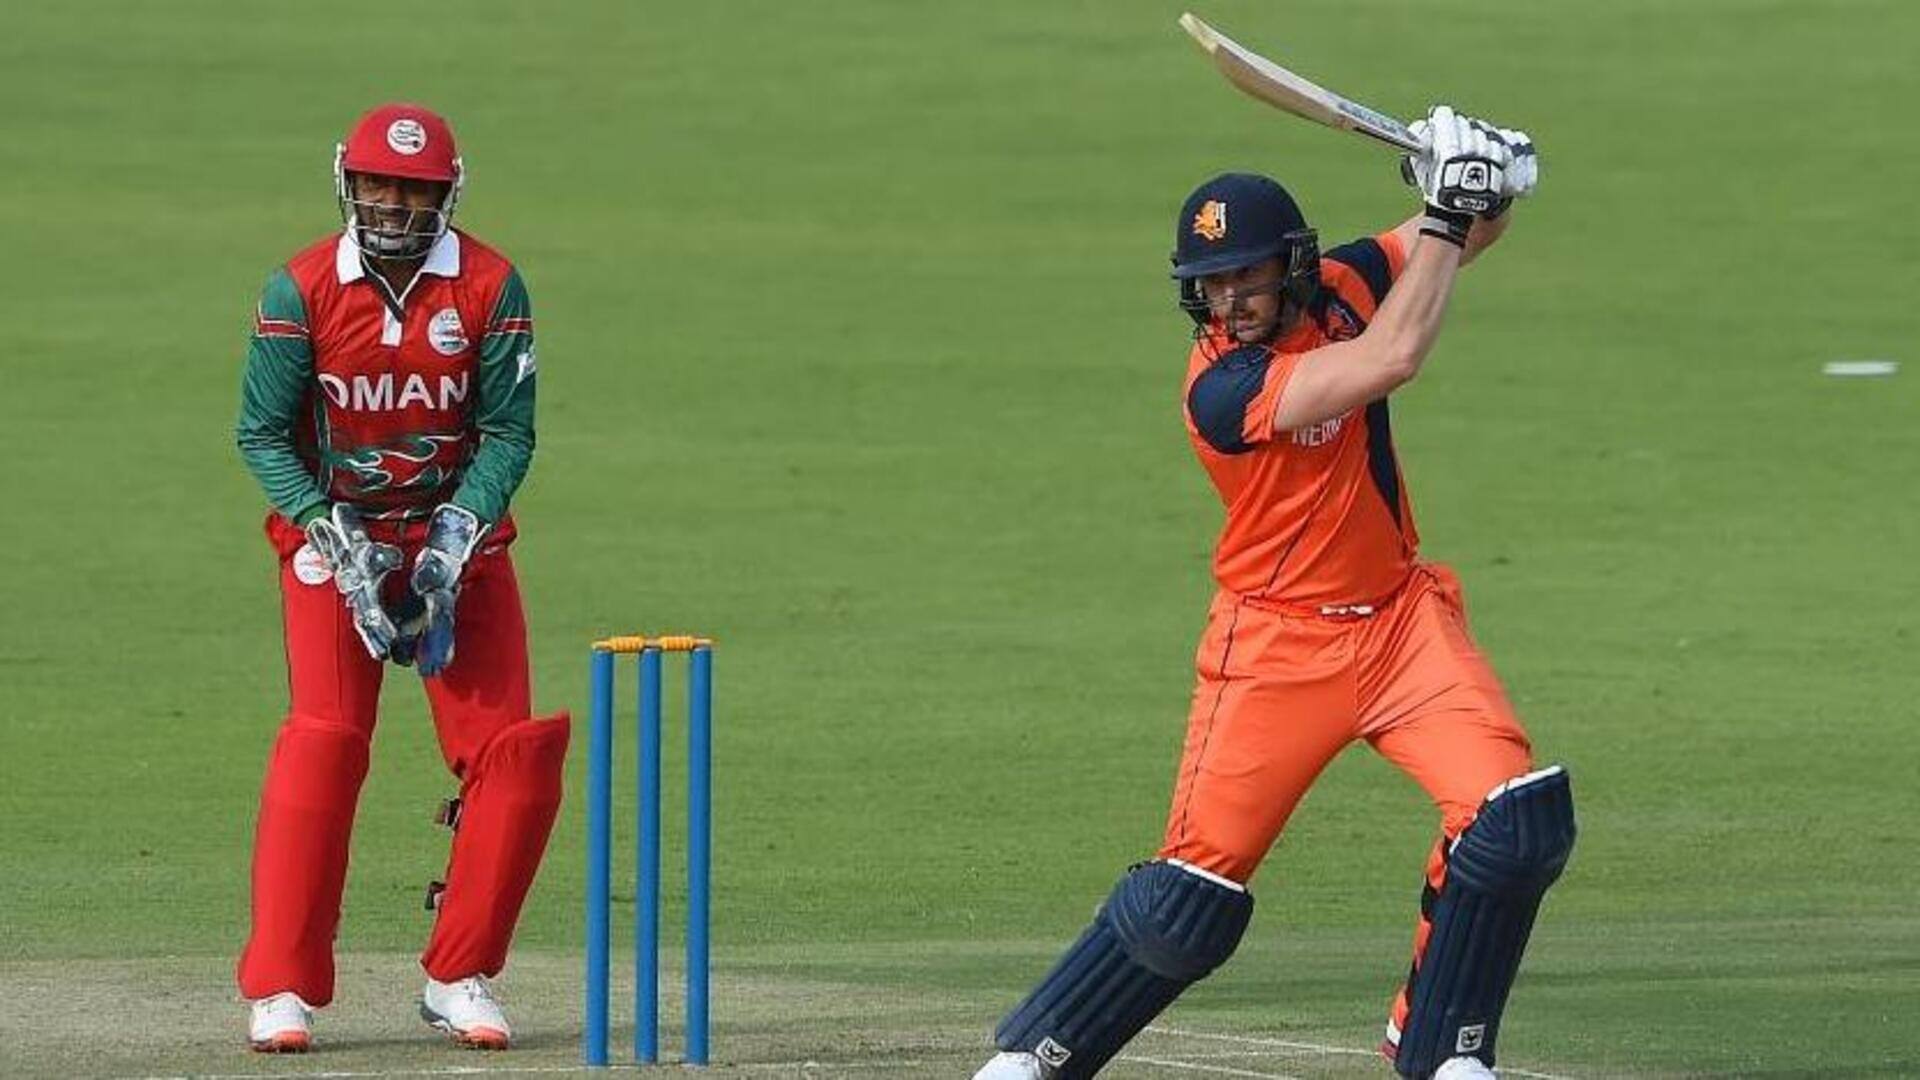 CWC Qualifiers: Barresi clocks his first ODI fifty since comeback